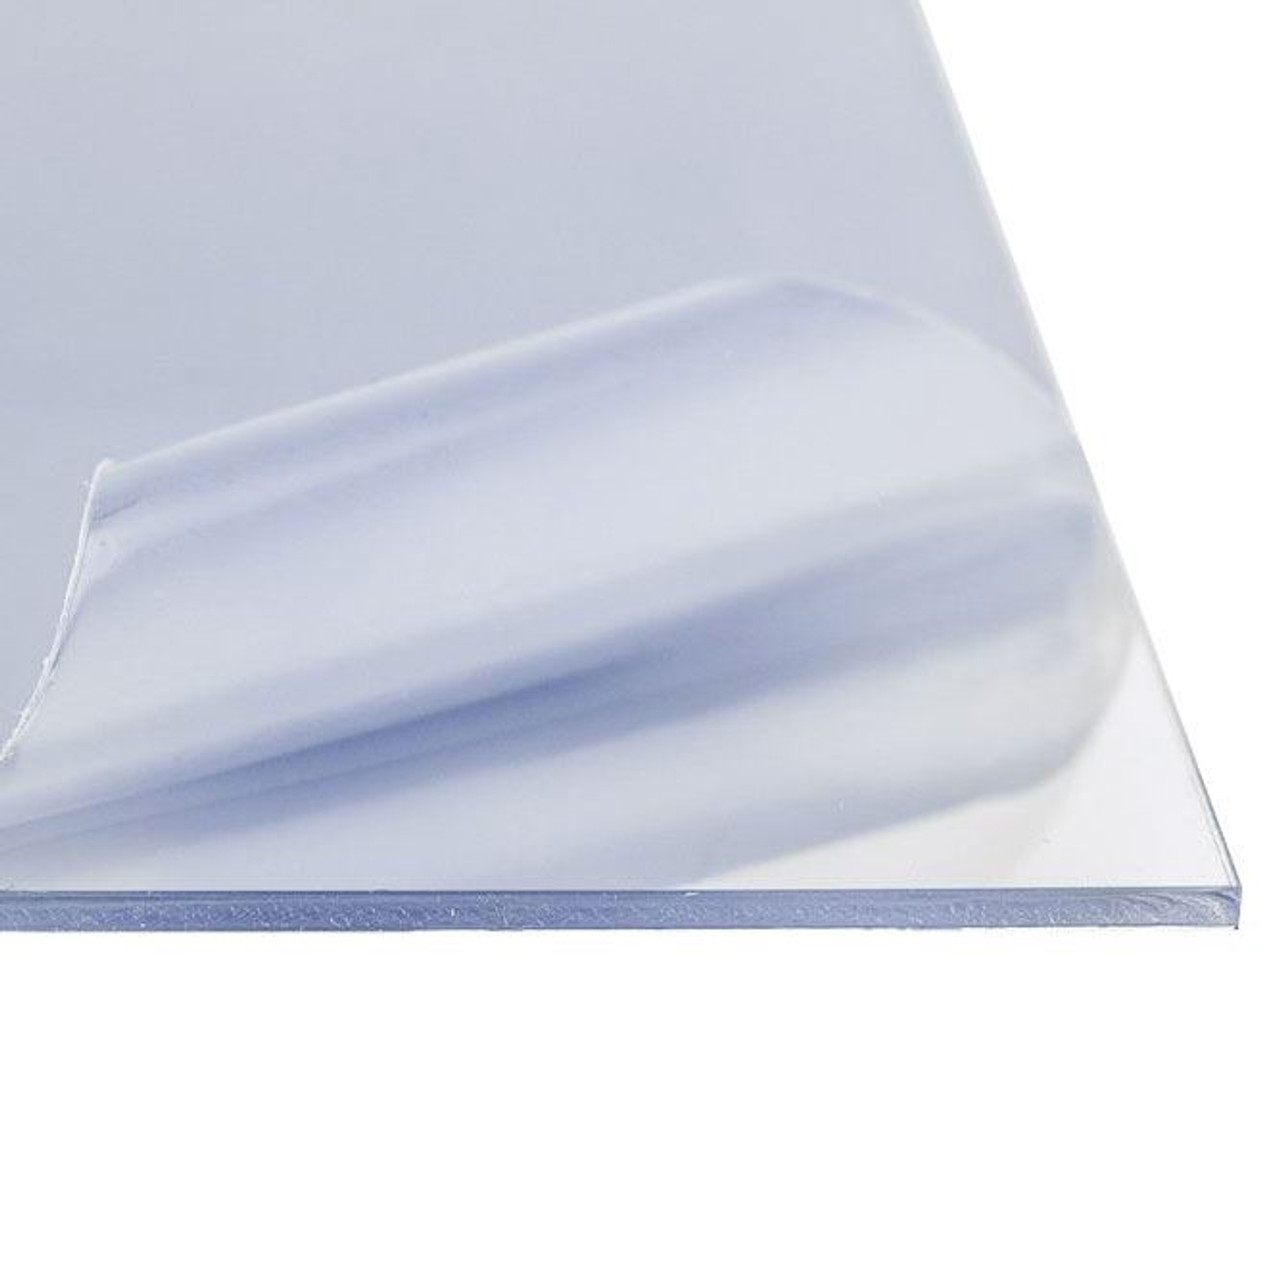 0.118 (1/8 inch) x 24" x 24" (3 Pack), Polycarbonate Clear Plastic Sheet, Plexiglass, Acrylic Replacement